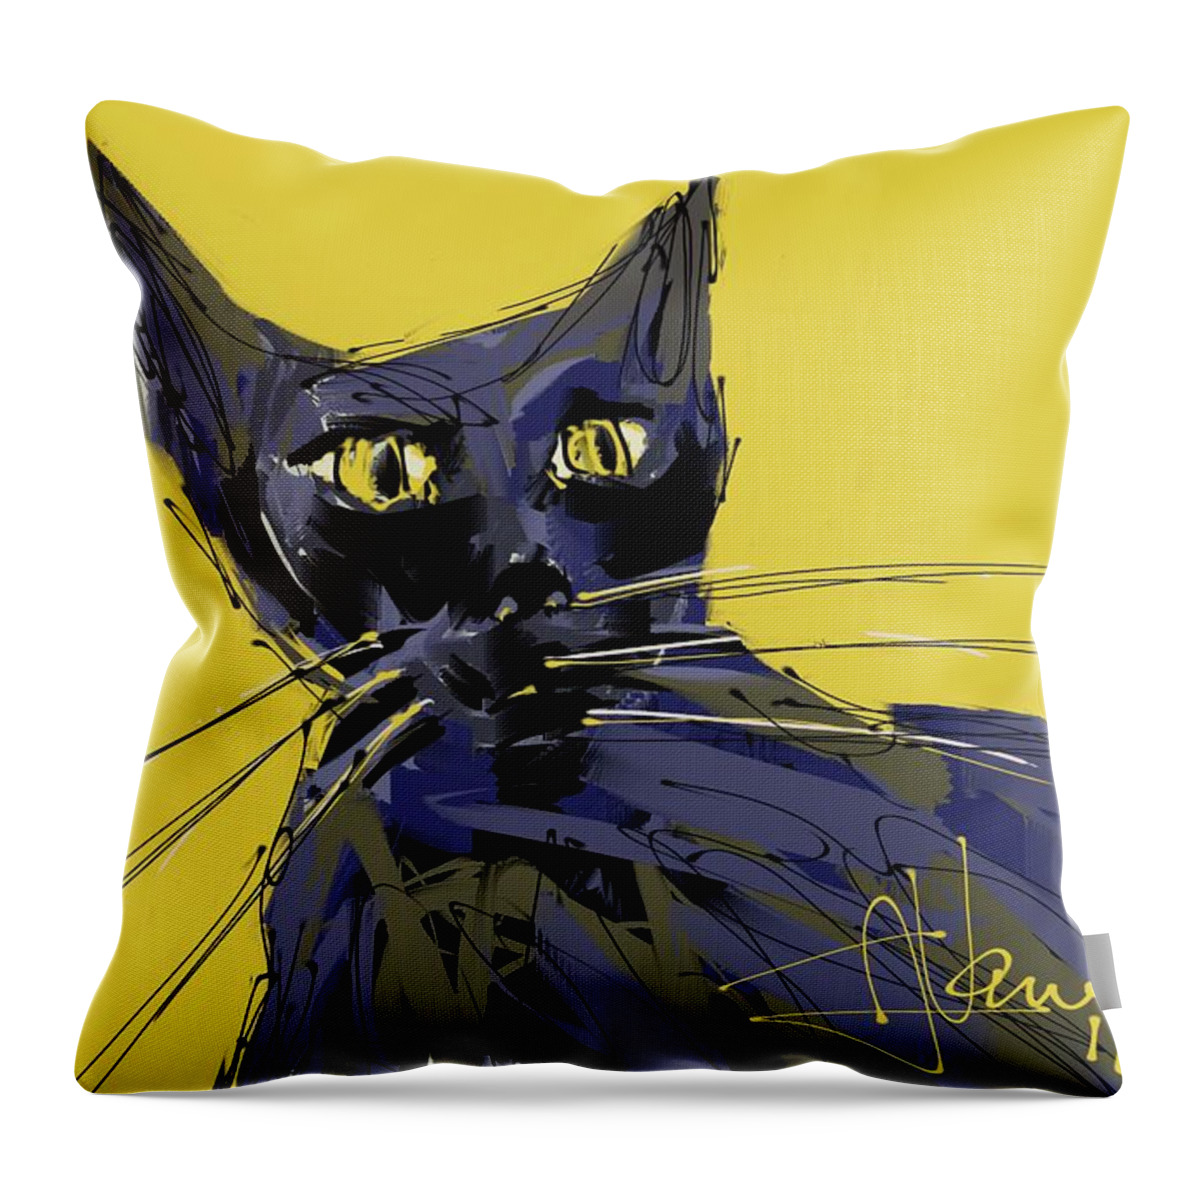 Cat Throw Pillow featuring the digital art Boots by Jim Vance